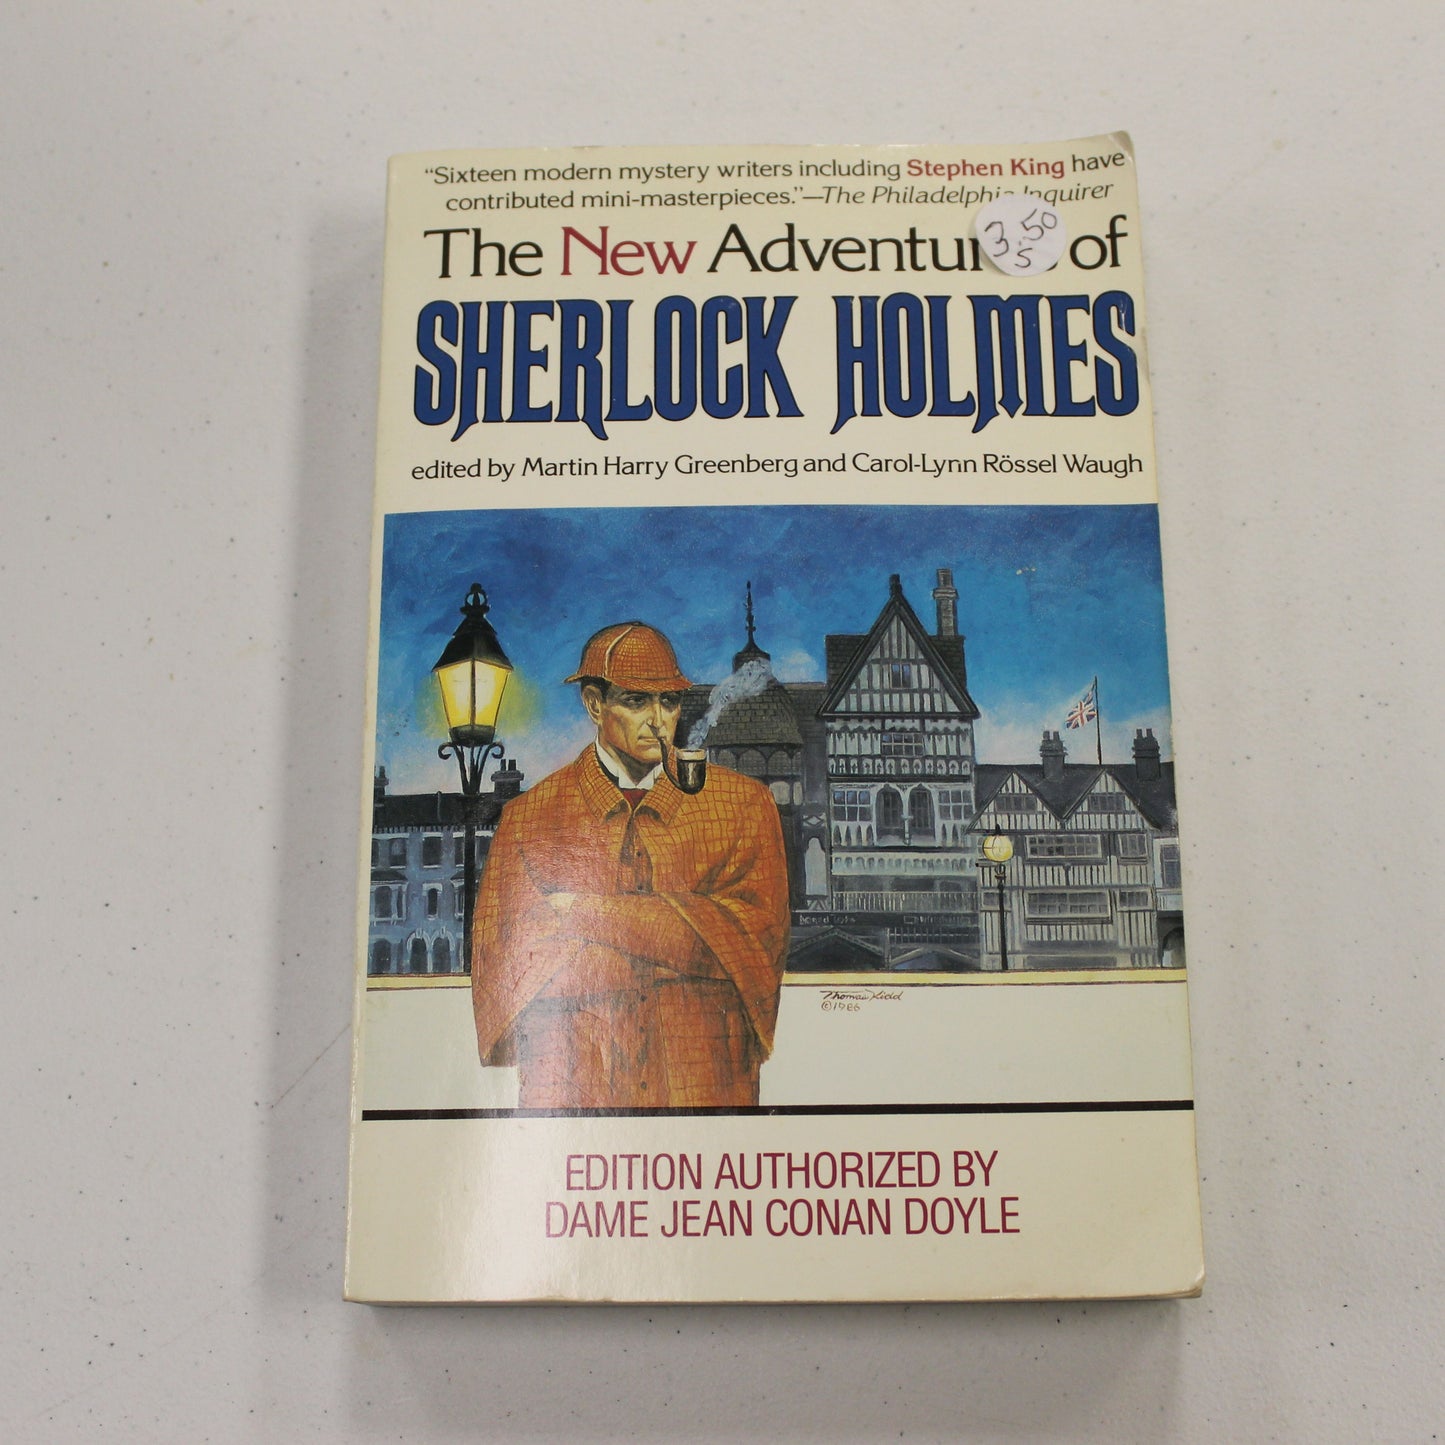 THE NEW ADVENTURES OF SHERLOCK HOLMES